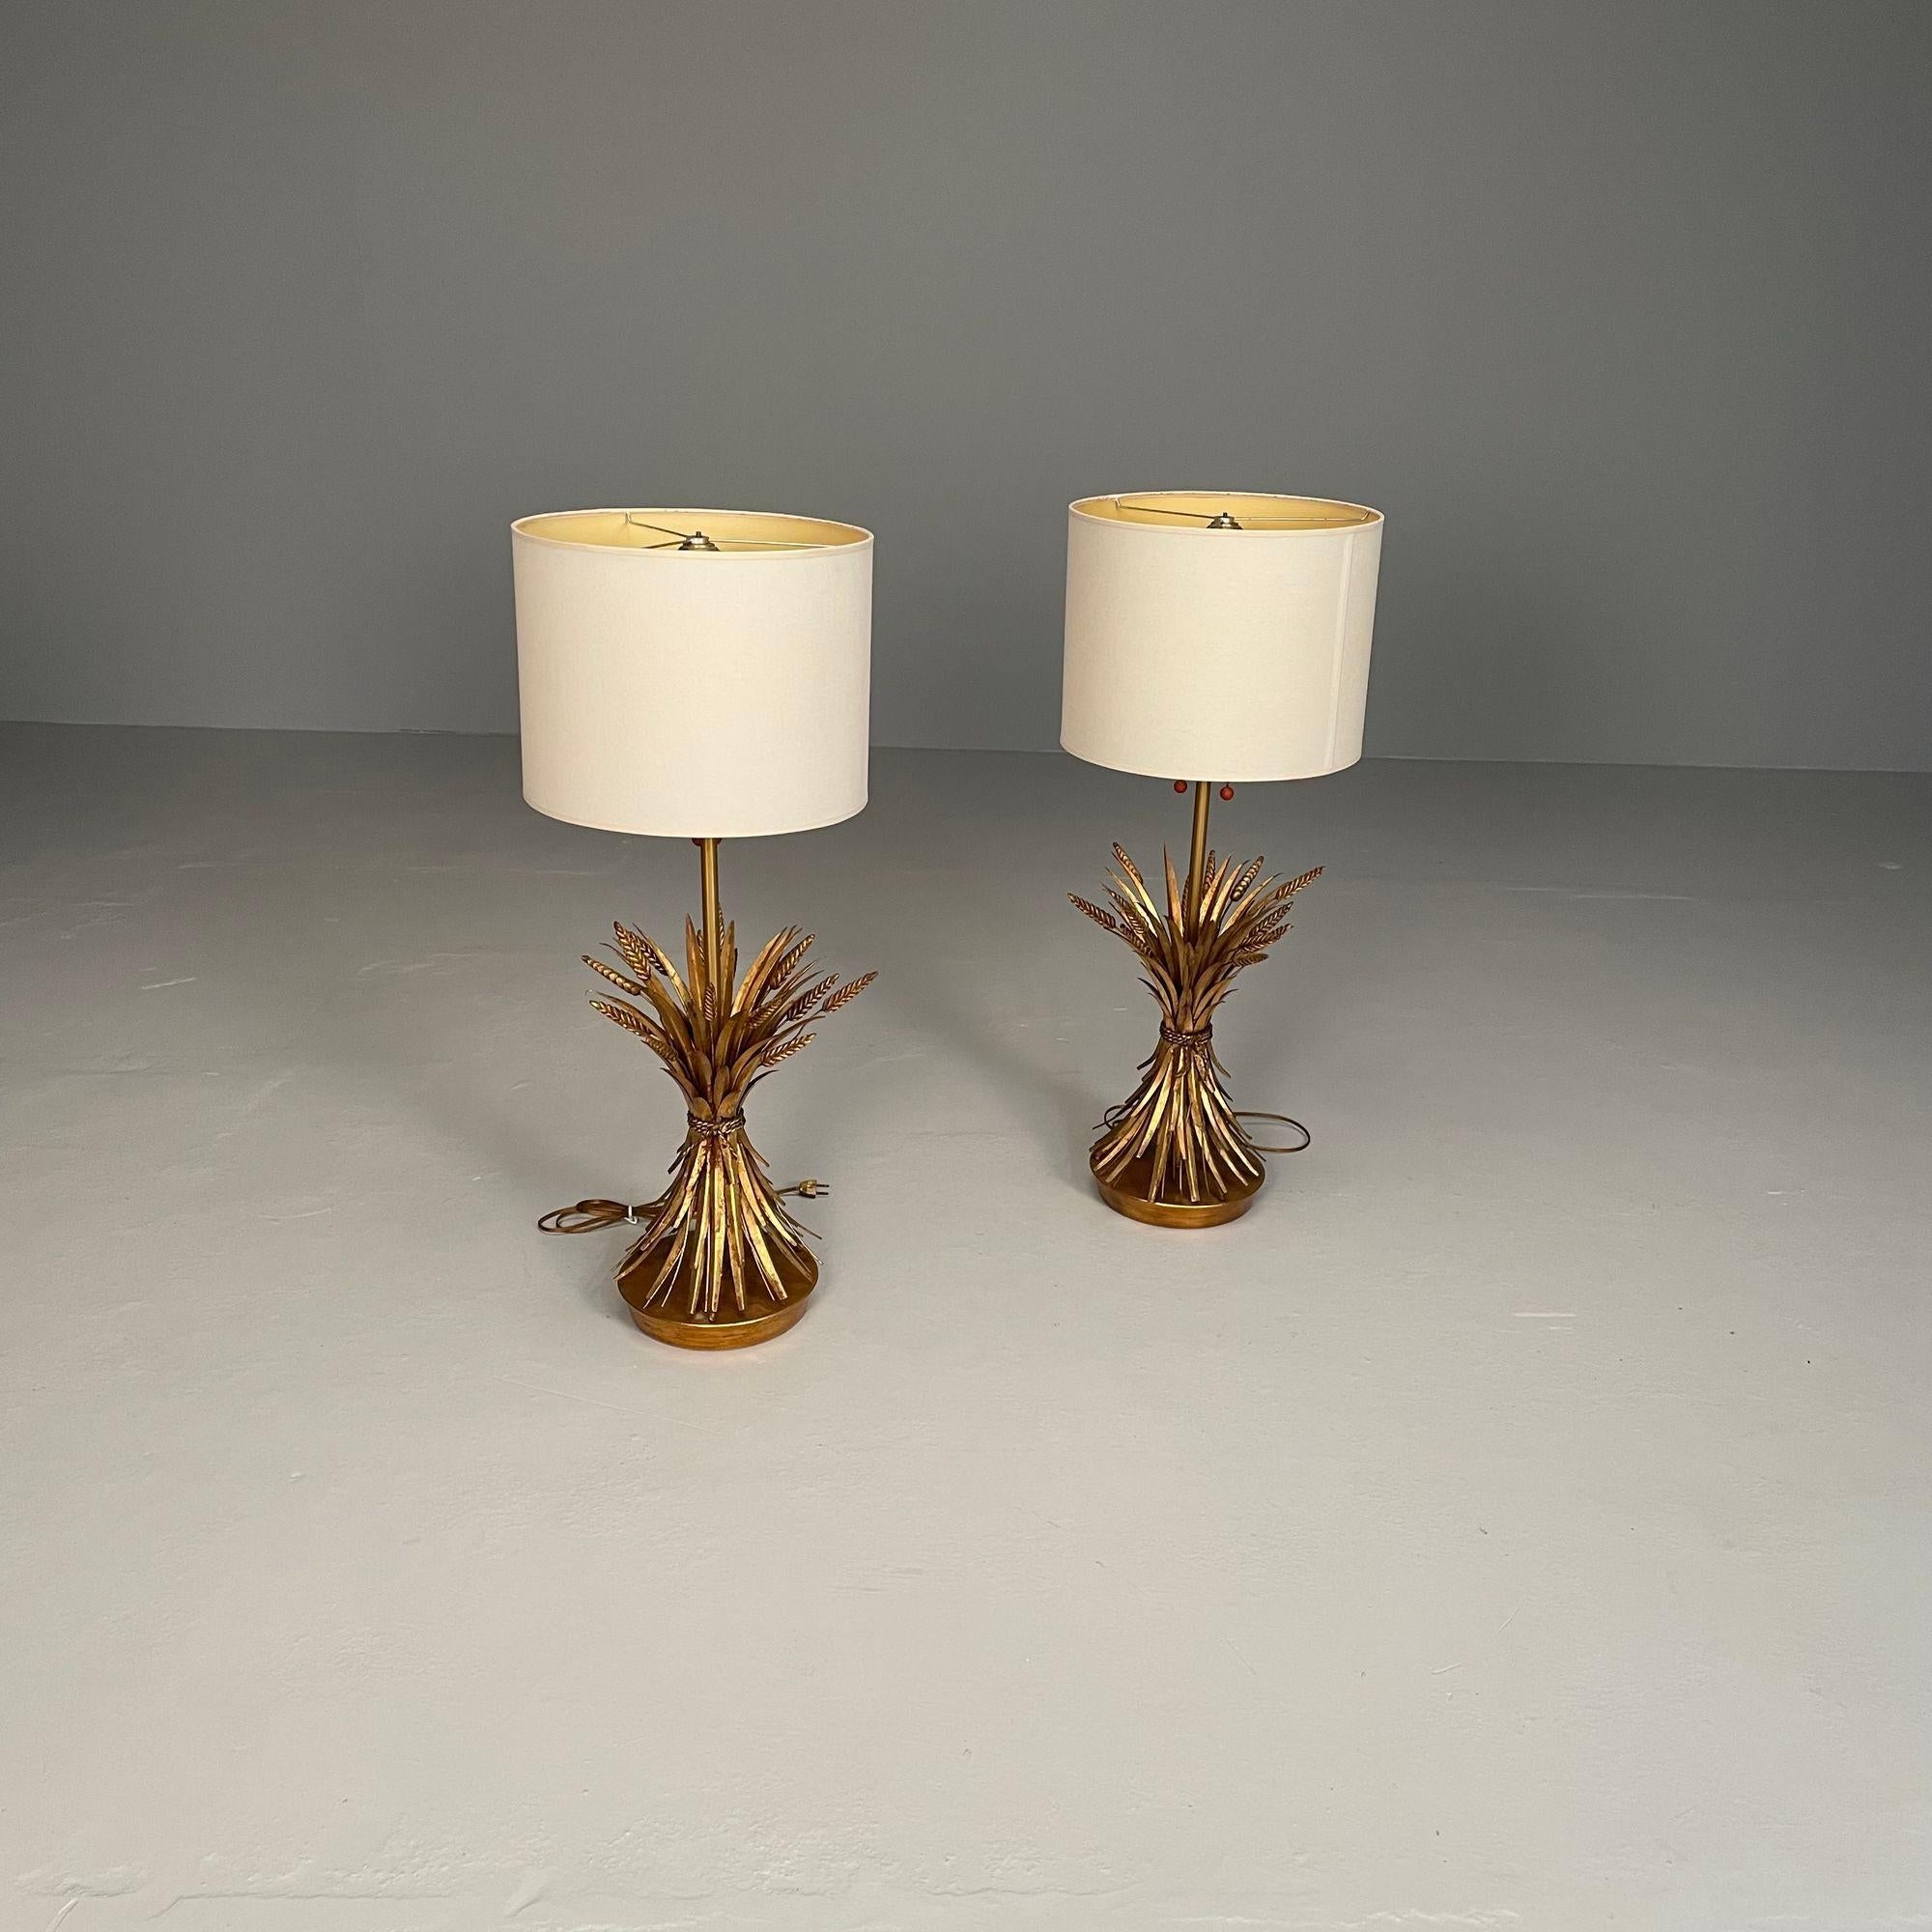 Late 20th Century Pair of Hollywood Regency Style Wheat Sheath Table / Desk Lamps, Gilt Metal